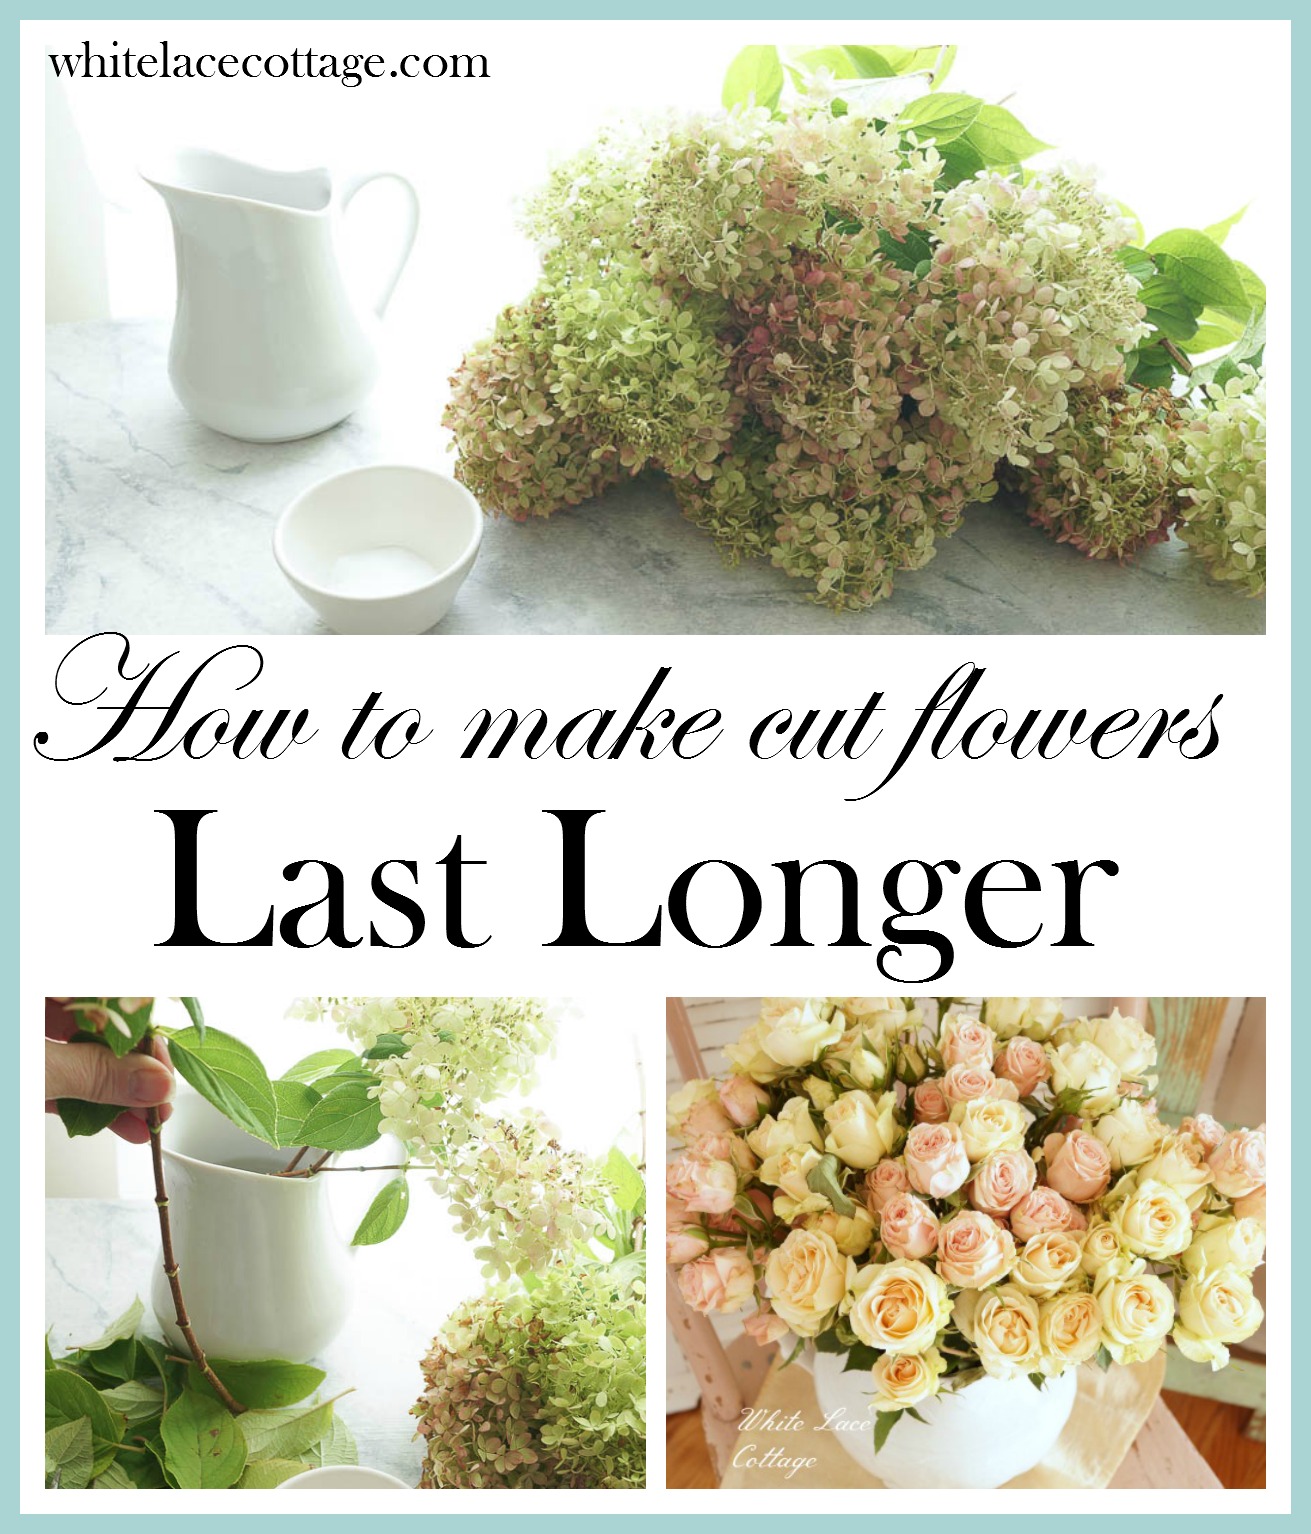 How To Make Cut Flowers Last Longer - ANNE P MAKEUP AND MORE